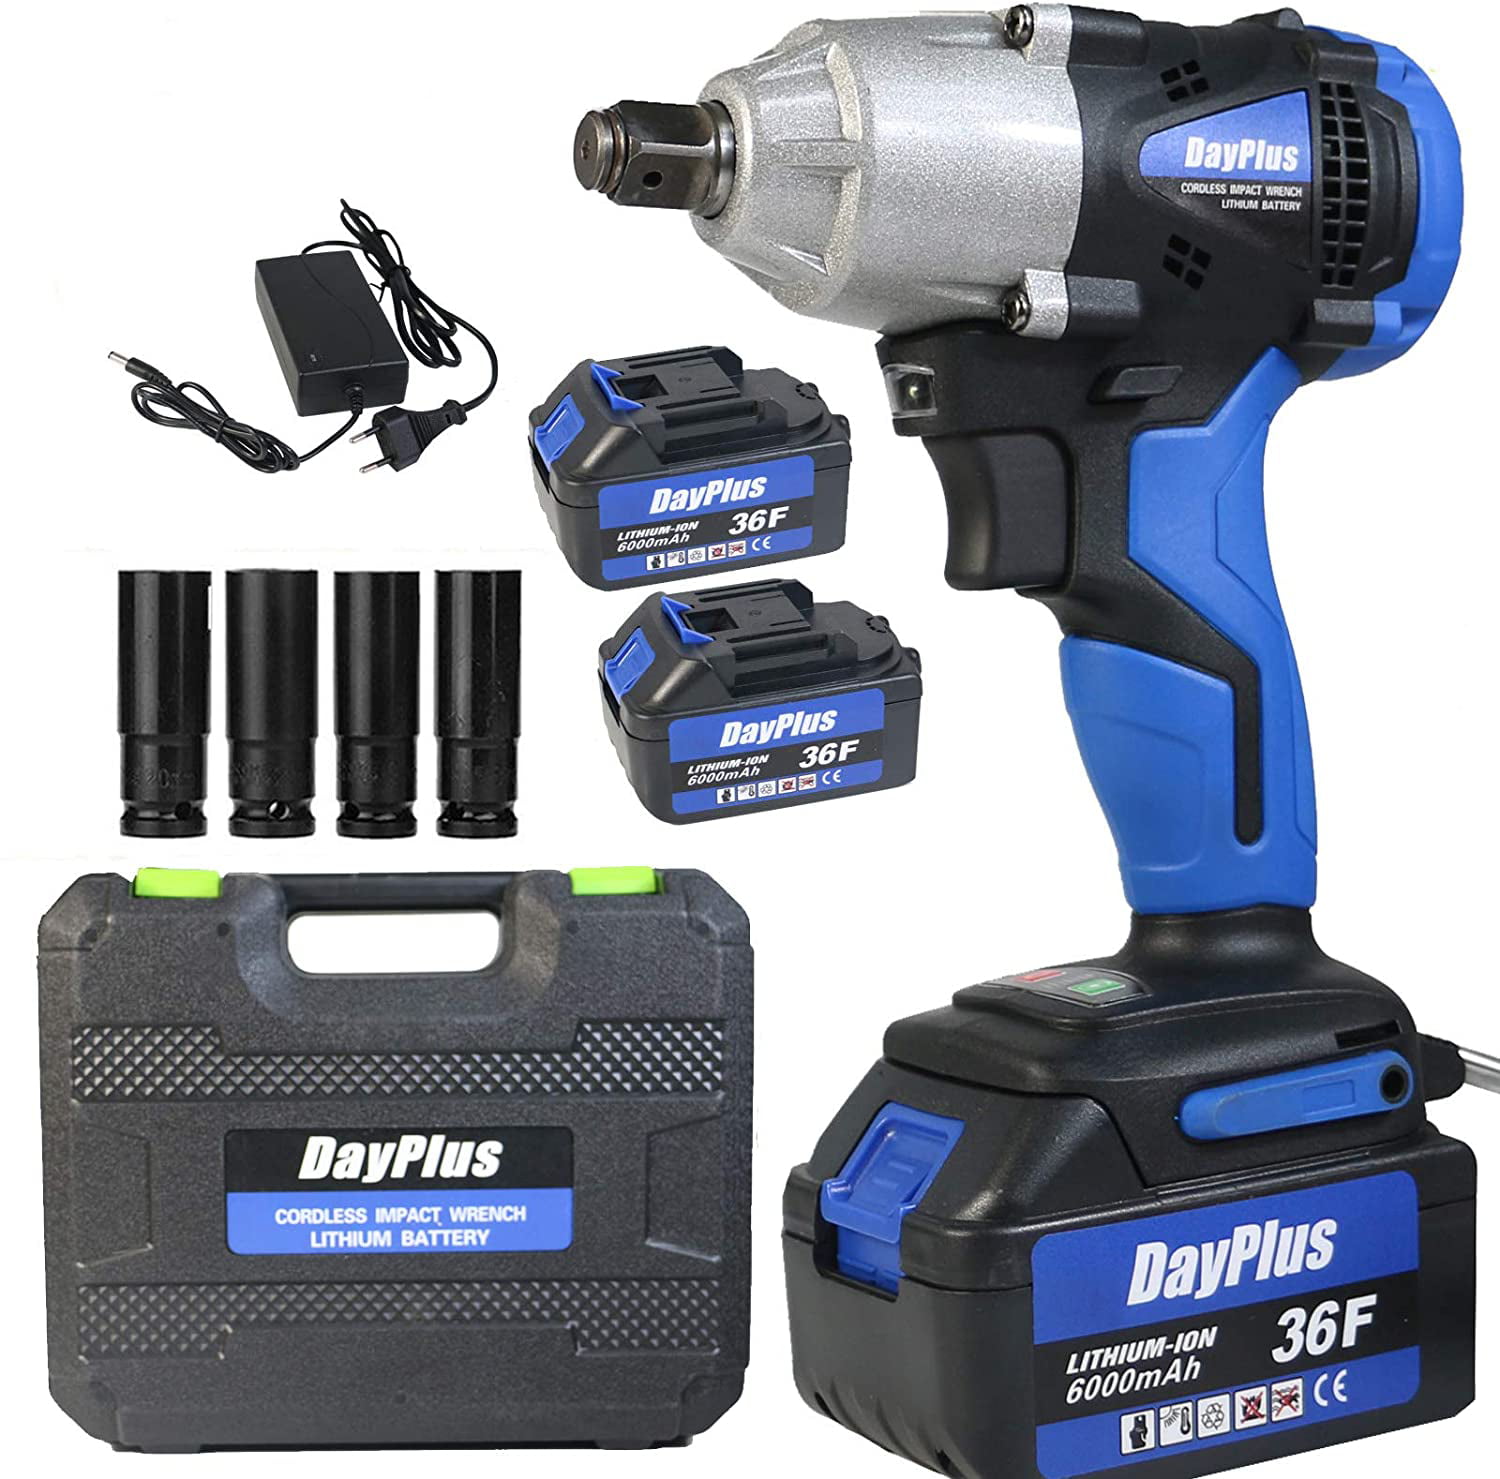 4 Socket 14/17/19/22mm Cordless Electric Impact Wrench 460Nm Max Torque 18V 1/2 inch Square Drive with LED Workd Light 6000 mAh Li-Ion Battery Carry Case + Charger